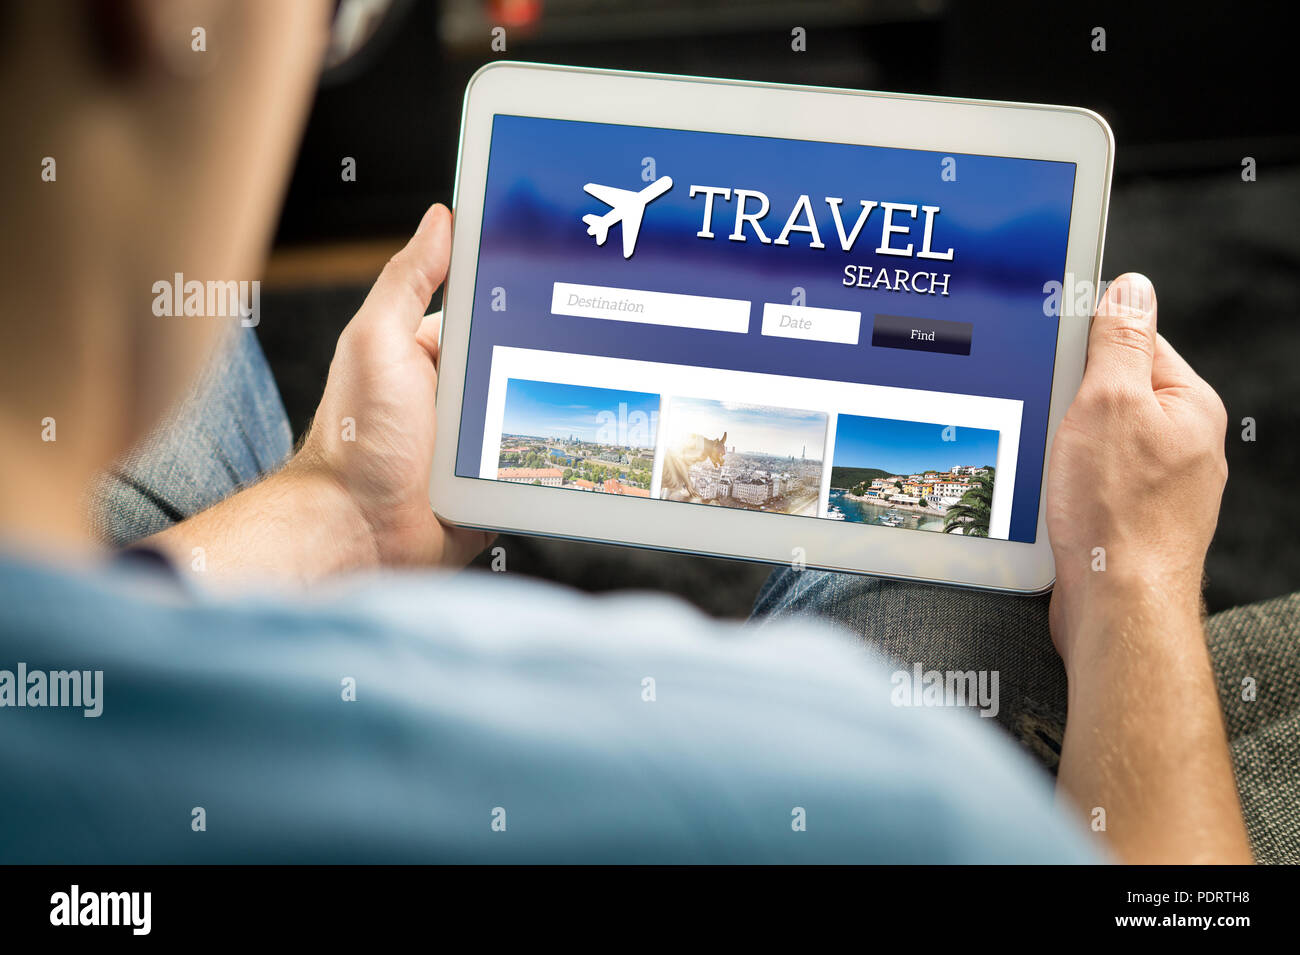 Man searching cheap flights, hotel or holiday package on internet by using online travel search application with tablet. Stock Photo